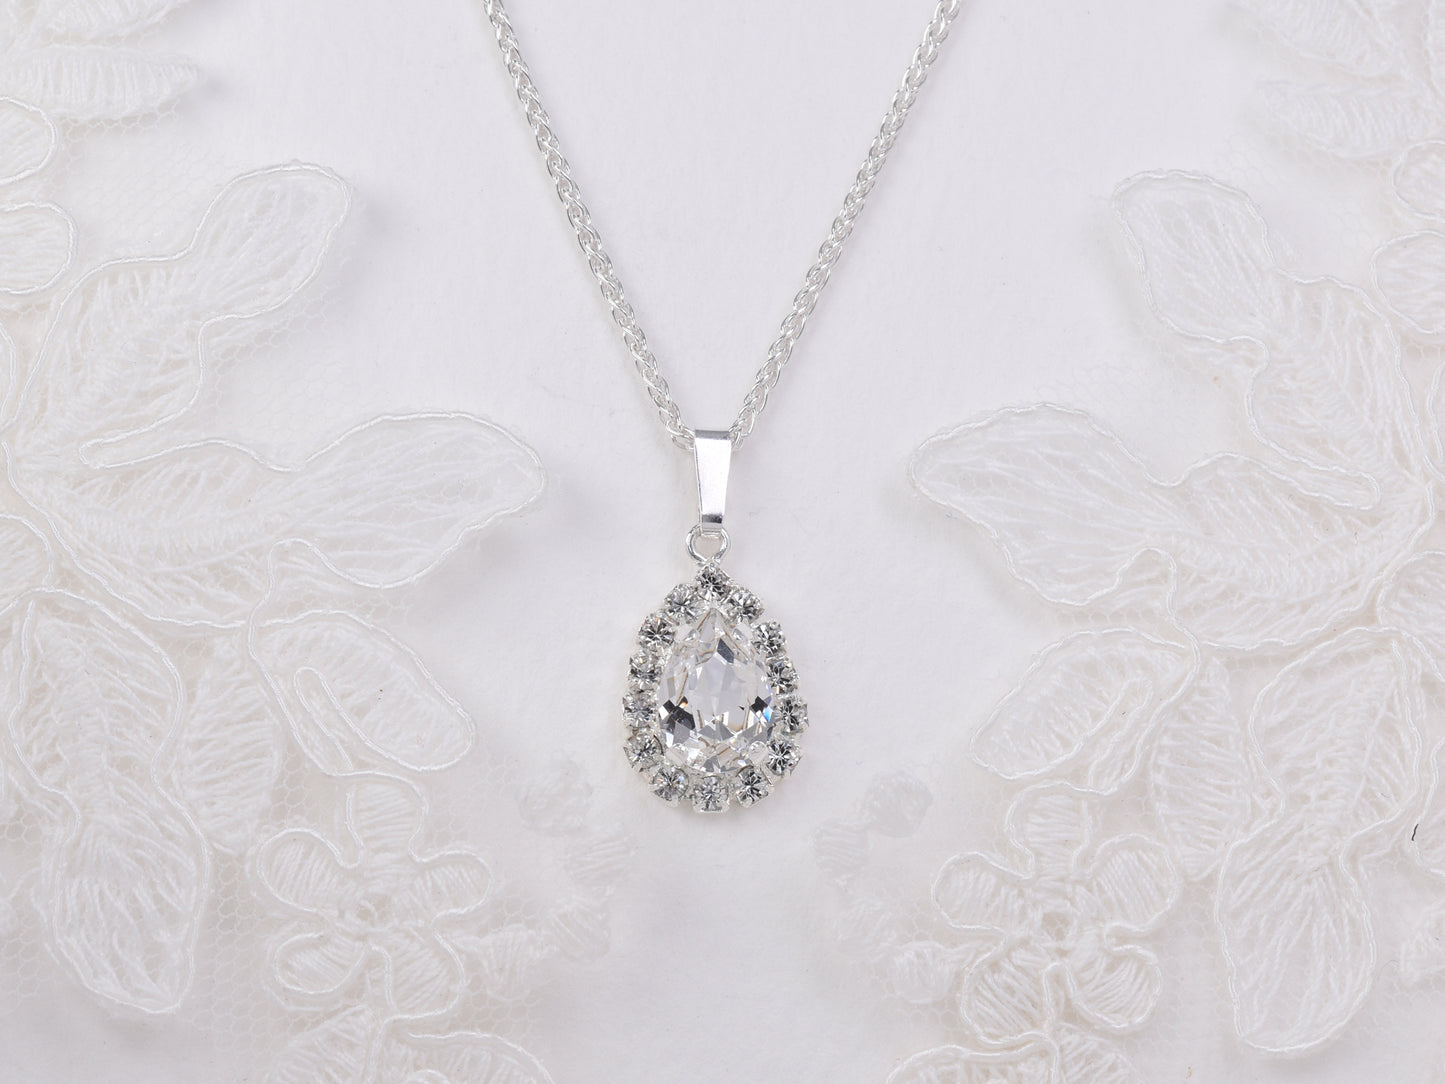 Mary - An elegant pendant necklace.